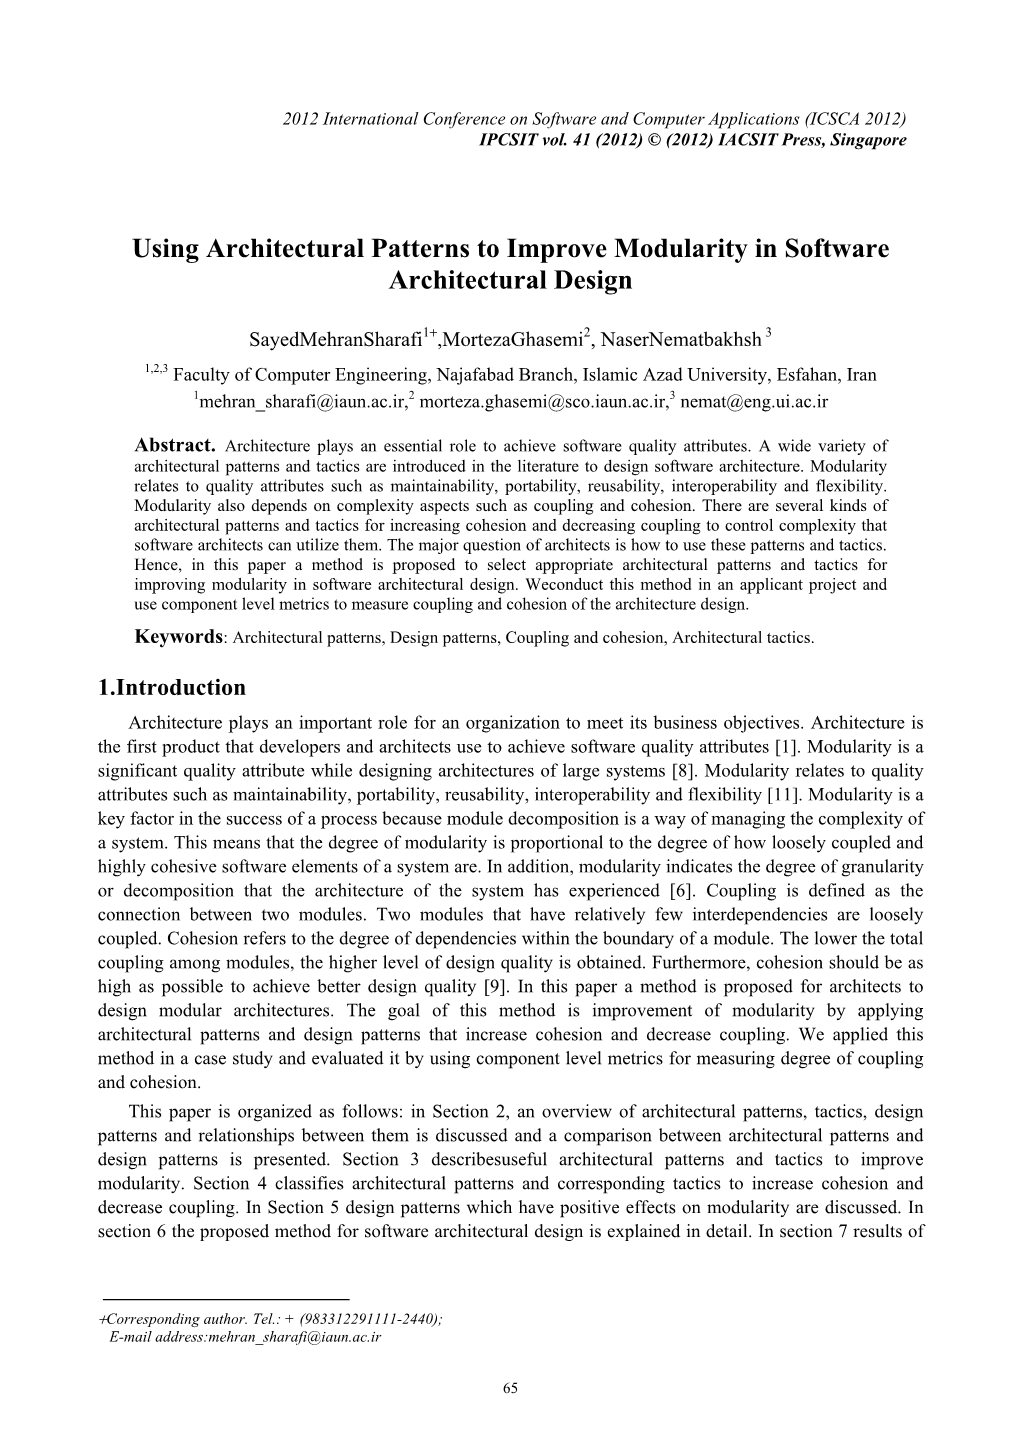 Using Architectural Patterns to Improve Modularity in Software Architectural Design